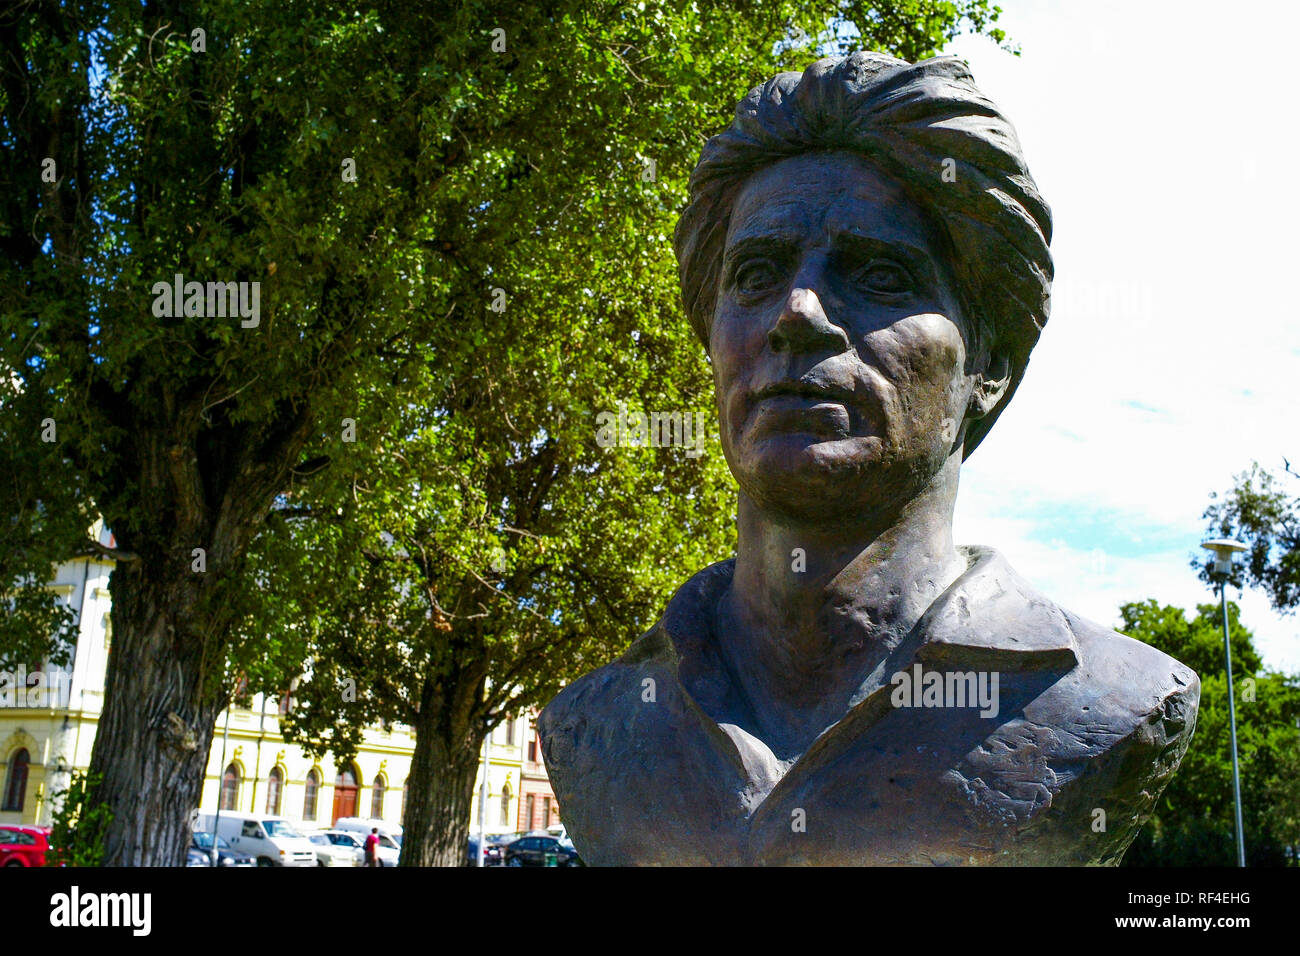 Jean pierre pedrazzini hi-res stock photography and images - Alamy